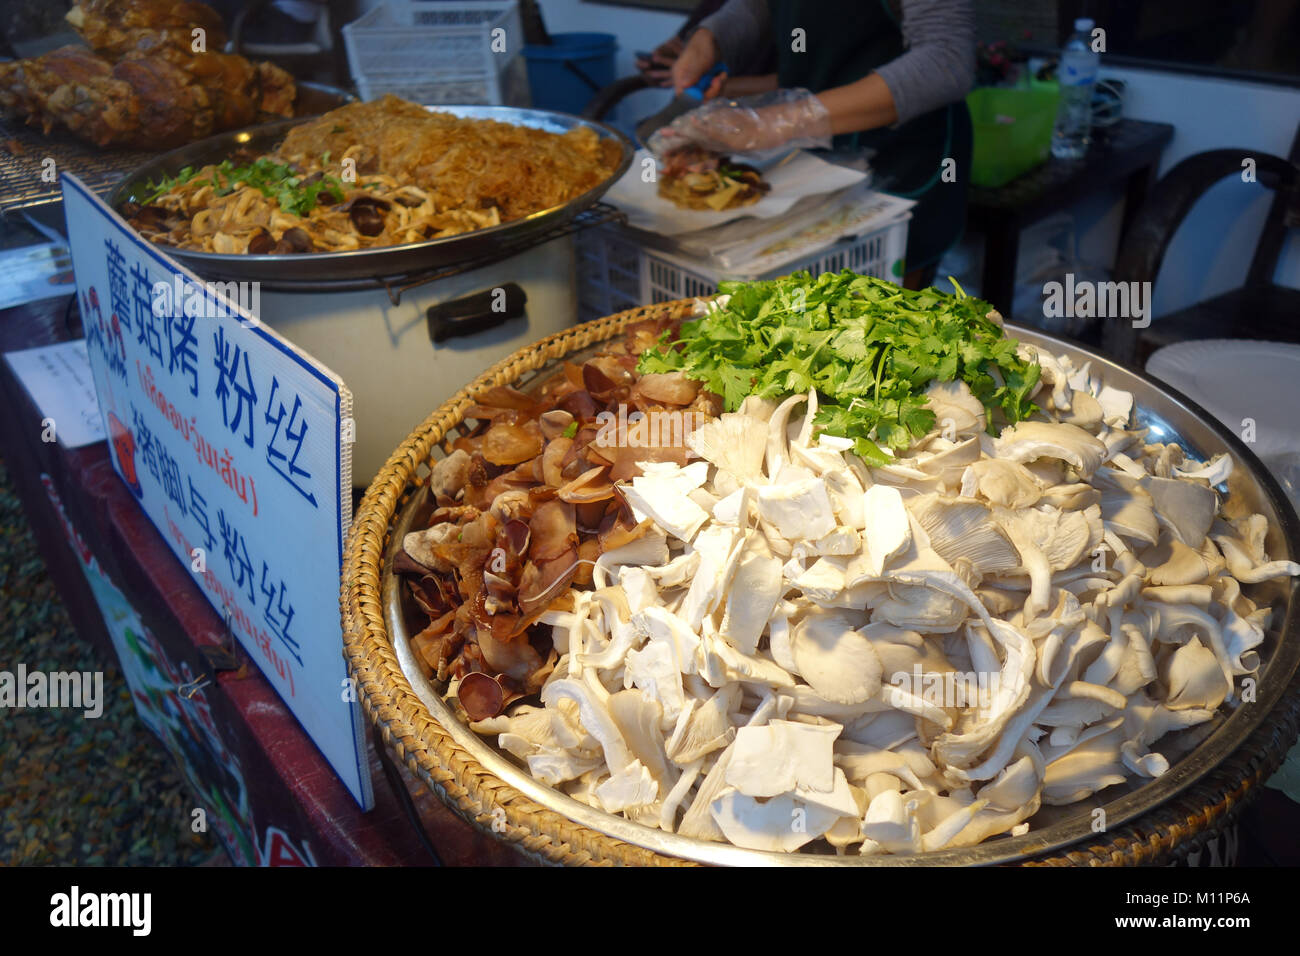 Mushrooms for sale at street food stall, night markets, Chiang Mai, Thailand. No PR or MR Stock Photo